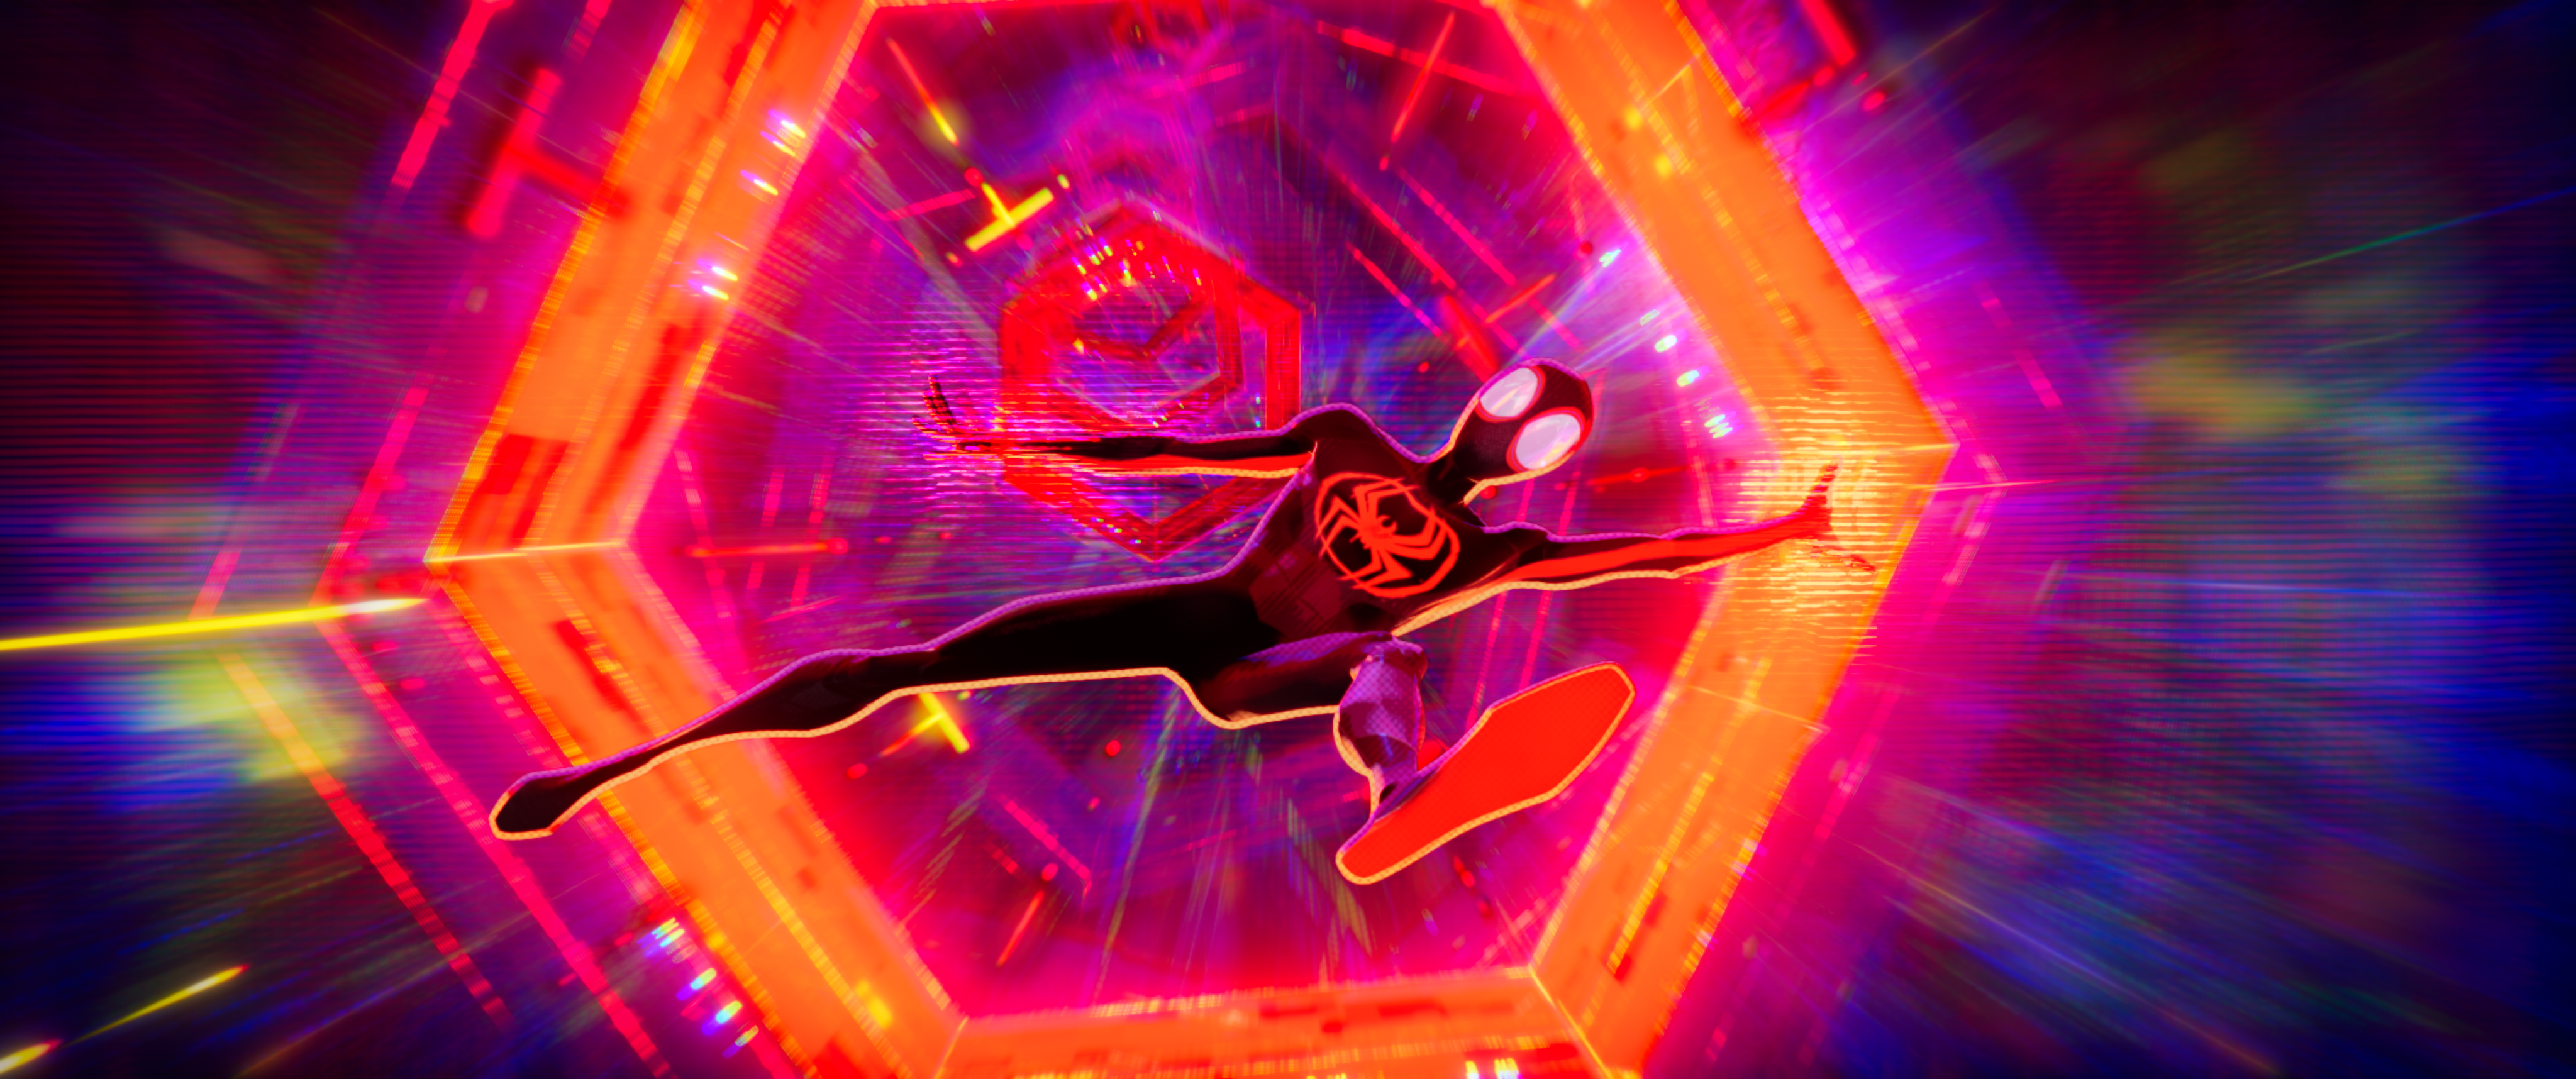 Spider-Man™: Across The Spider-Verse image 3